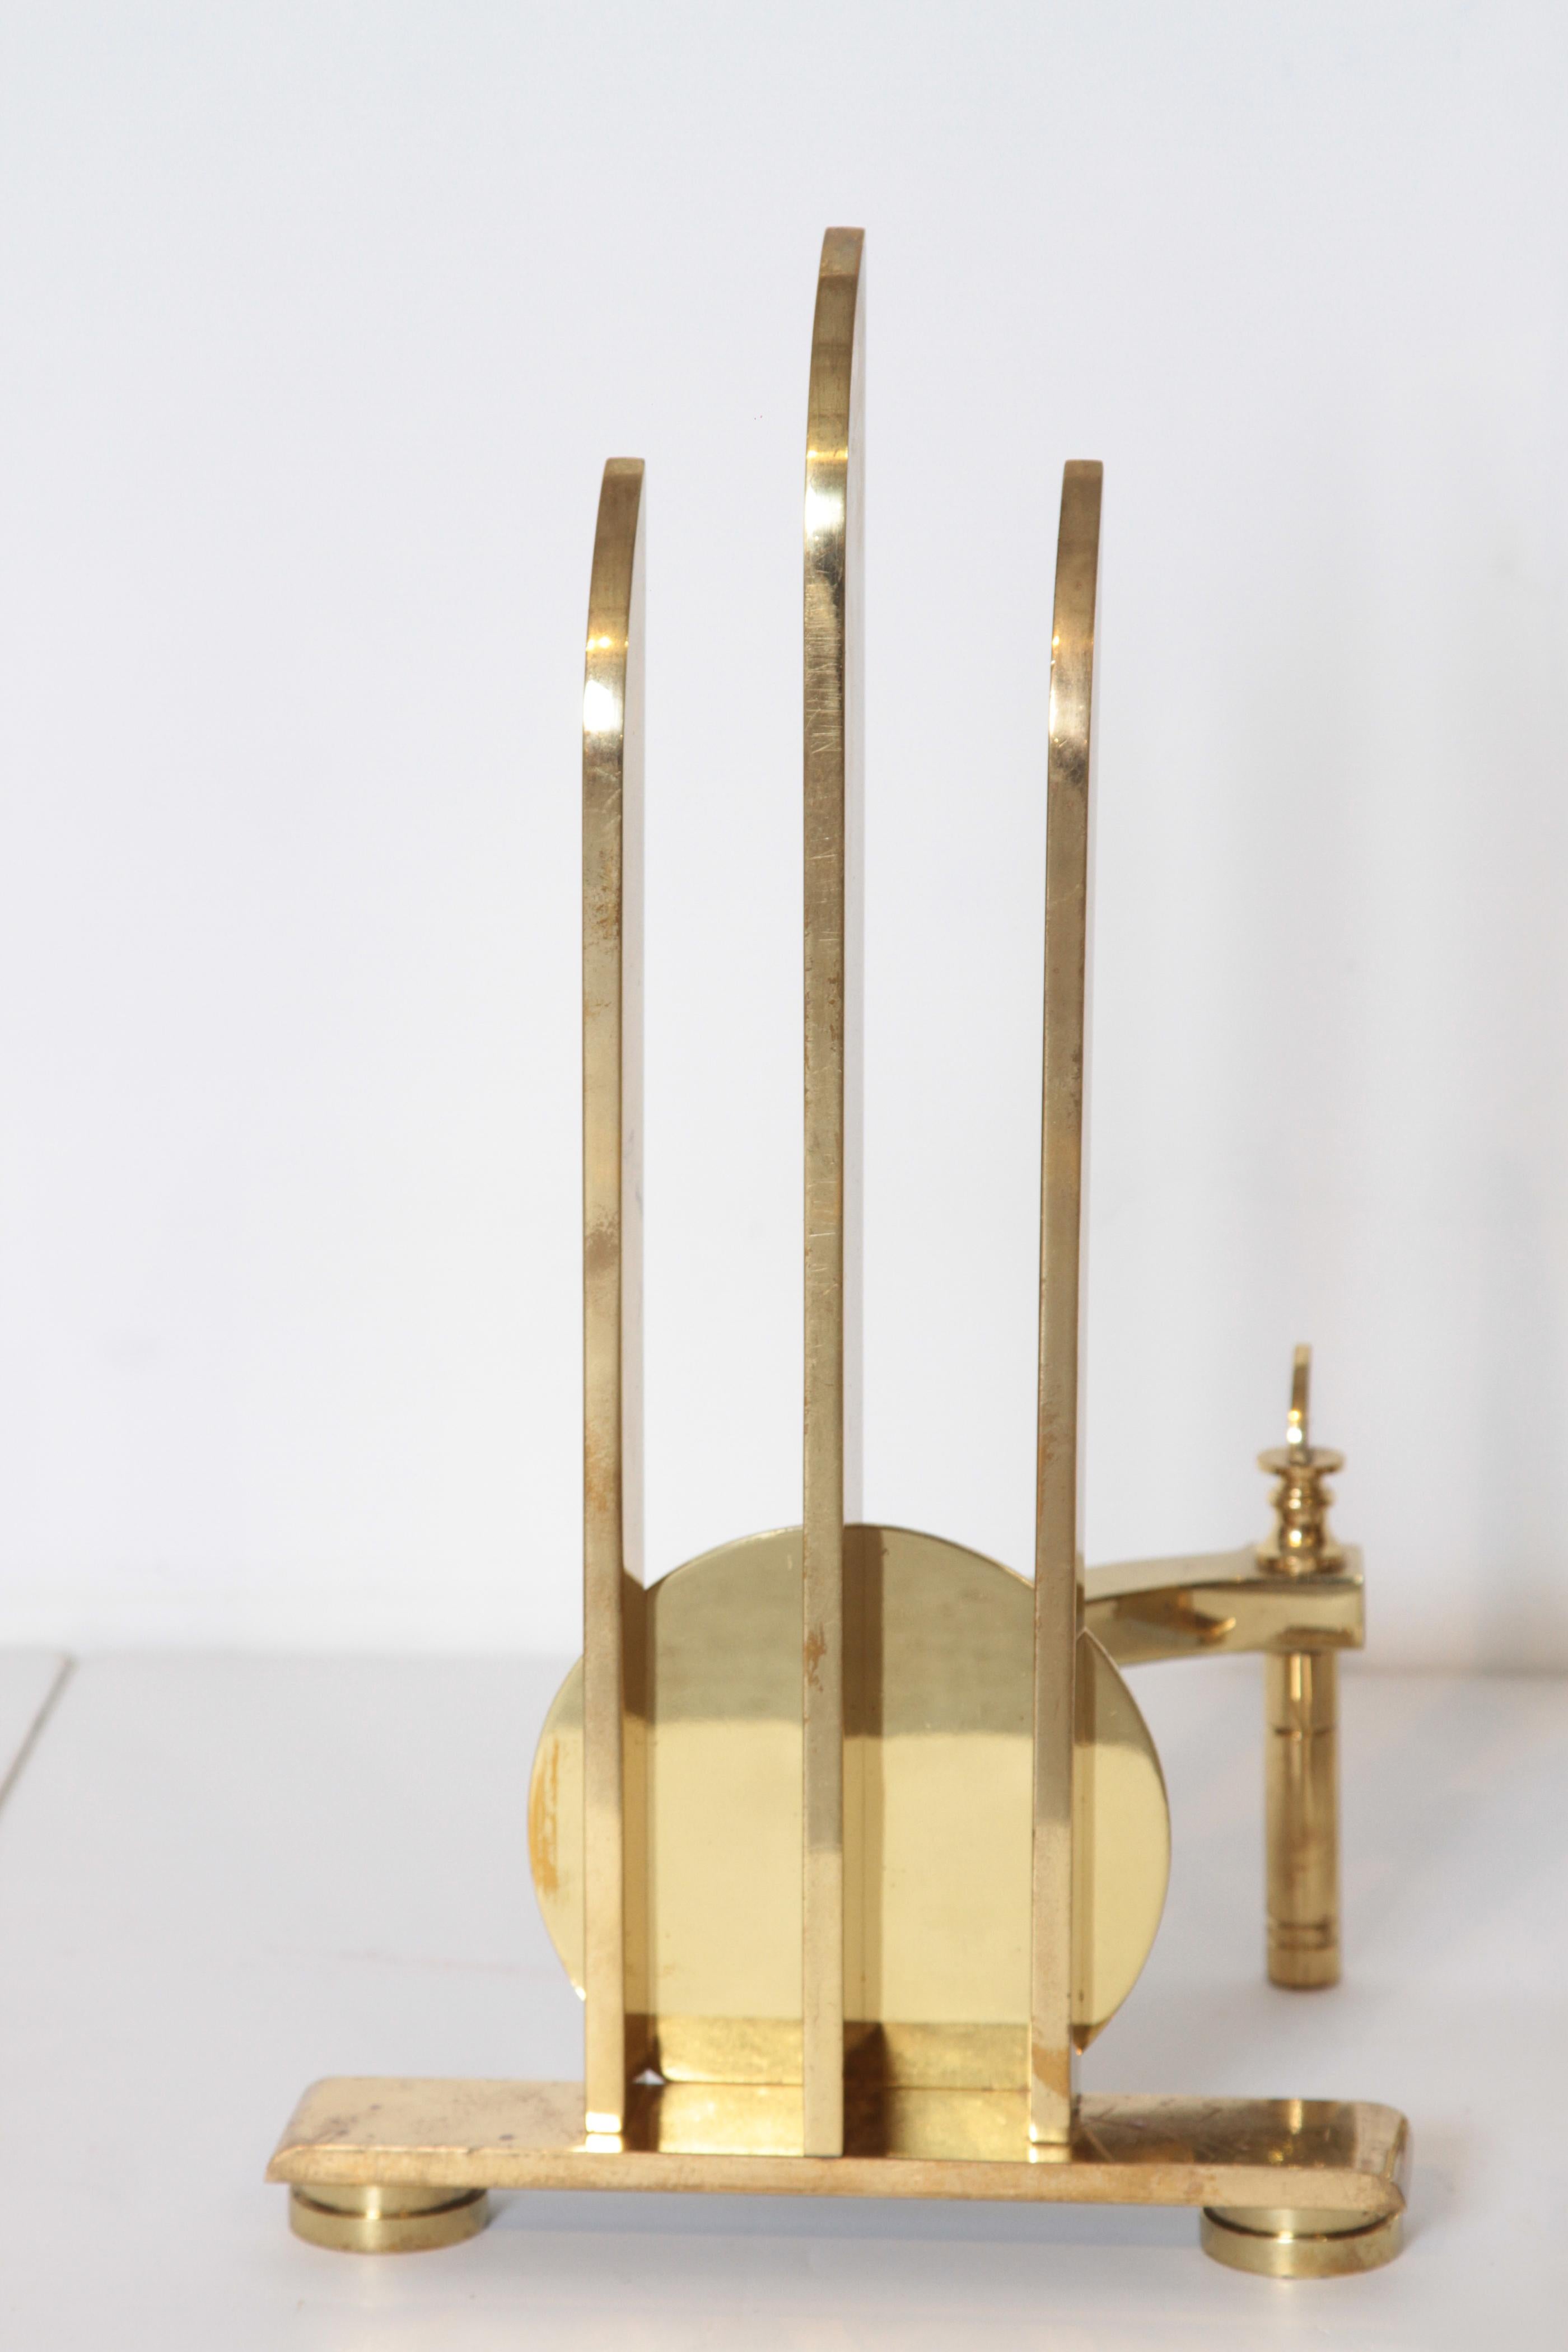 Machine Age Art Deco streamline andirons, in the manner of Walter Von Nessen.

Unparalleled solid brass Industrial Design construction, extreme heft.
A design much in the manner of Walter Von Nessen, if you are familiar with his chase 